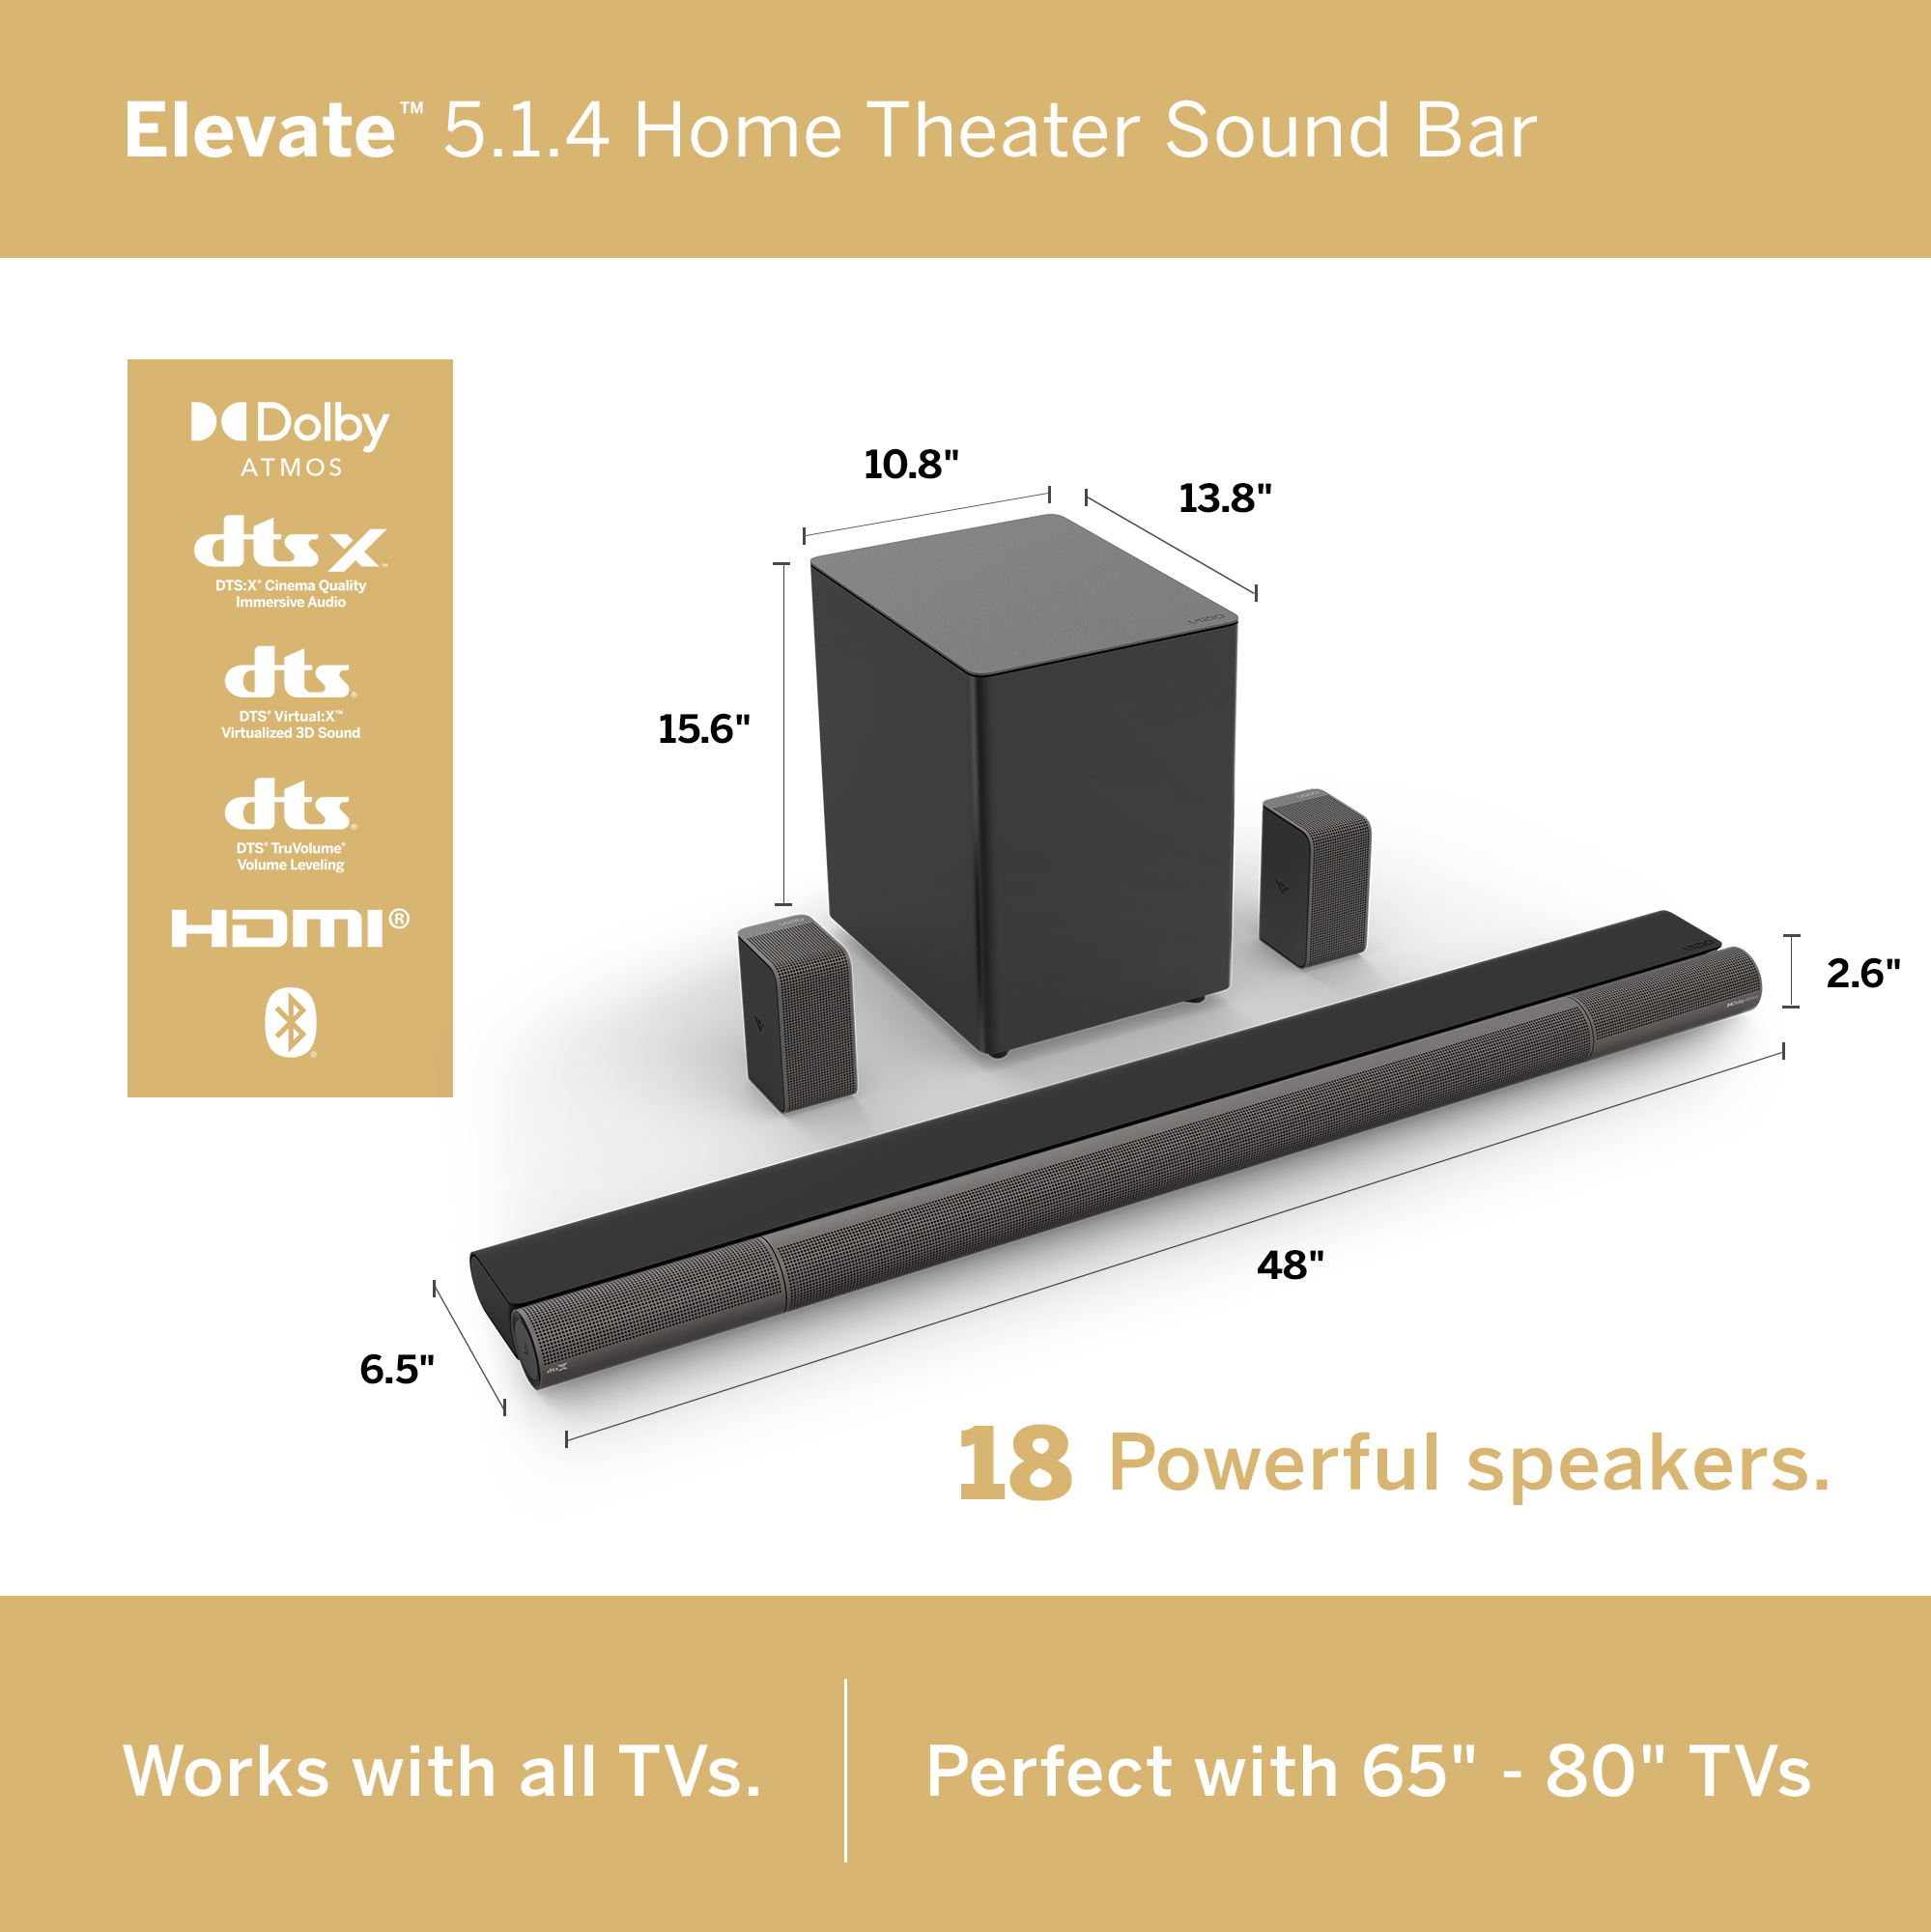 VIZIO Elevate 5.1.4 Home Theater Sound Bar with Dolby Atmos and DTS:X - P514a-H6 - image 3 of 21